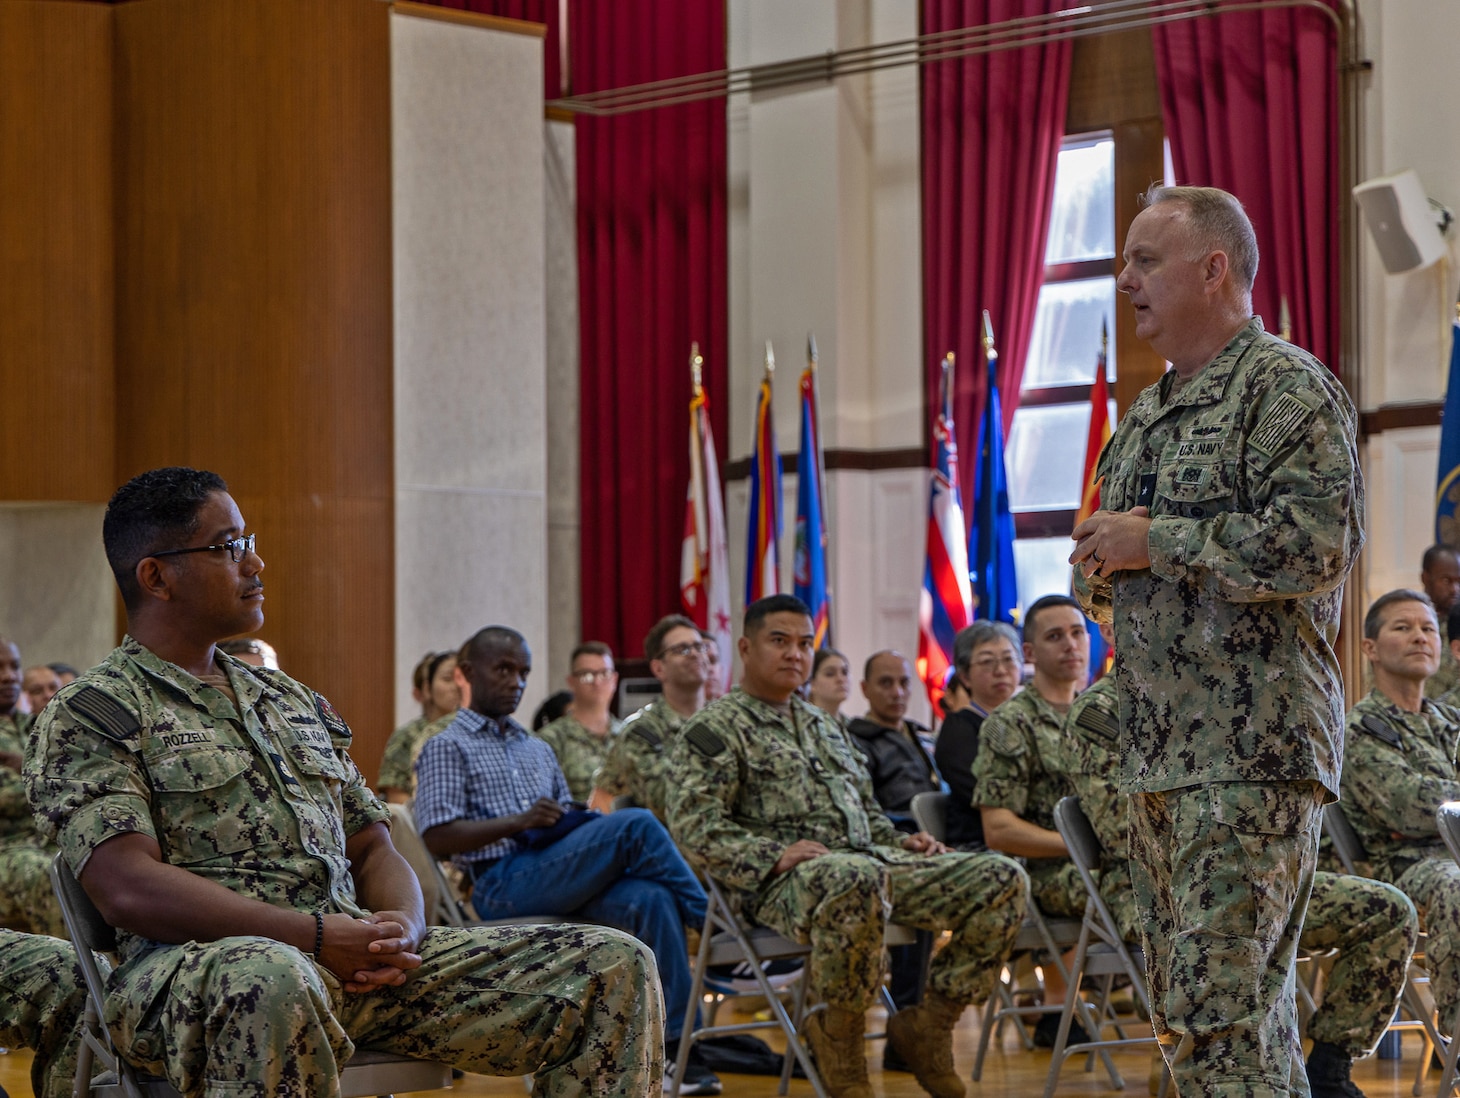 Acting Surgeon General Rear Admiral Darin K. Via answers questions from Sailors and staff from United States Navy Hospital Yokosuka